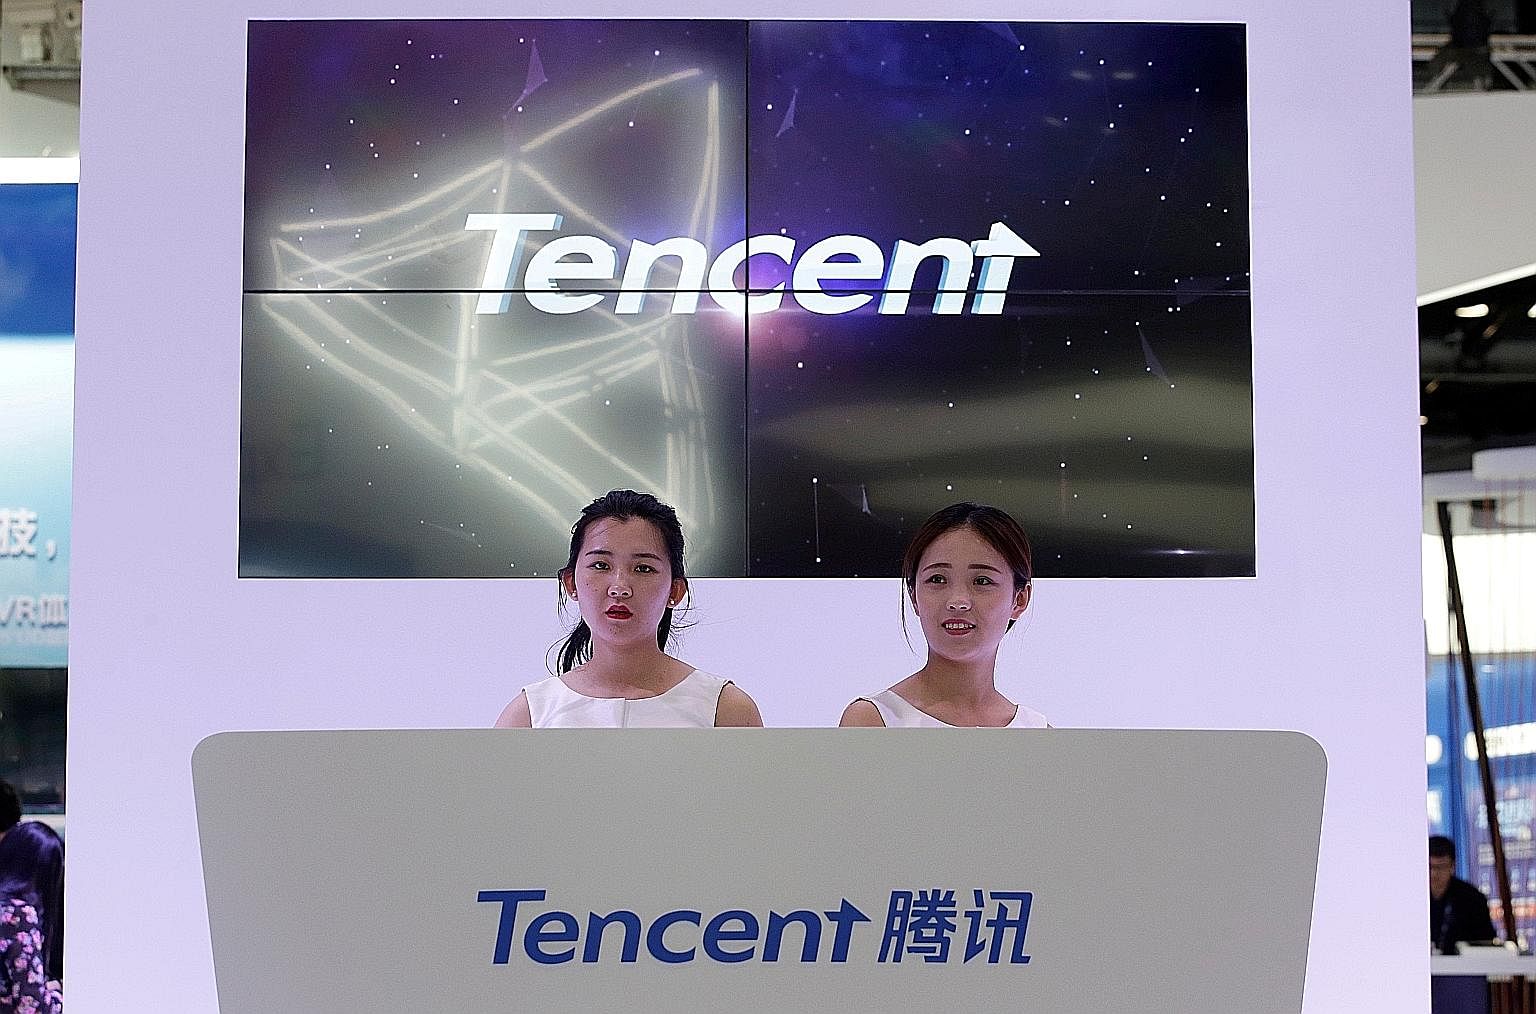 Internet behemoth Tencent Holdings may be the Hang Seng Index's top stock, but it sits in a lonely space with few new-economy peers for company. Hong Kong's stock market needs to find a way of attracting China's emerging new-economy stars or persuadi